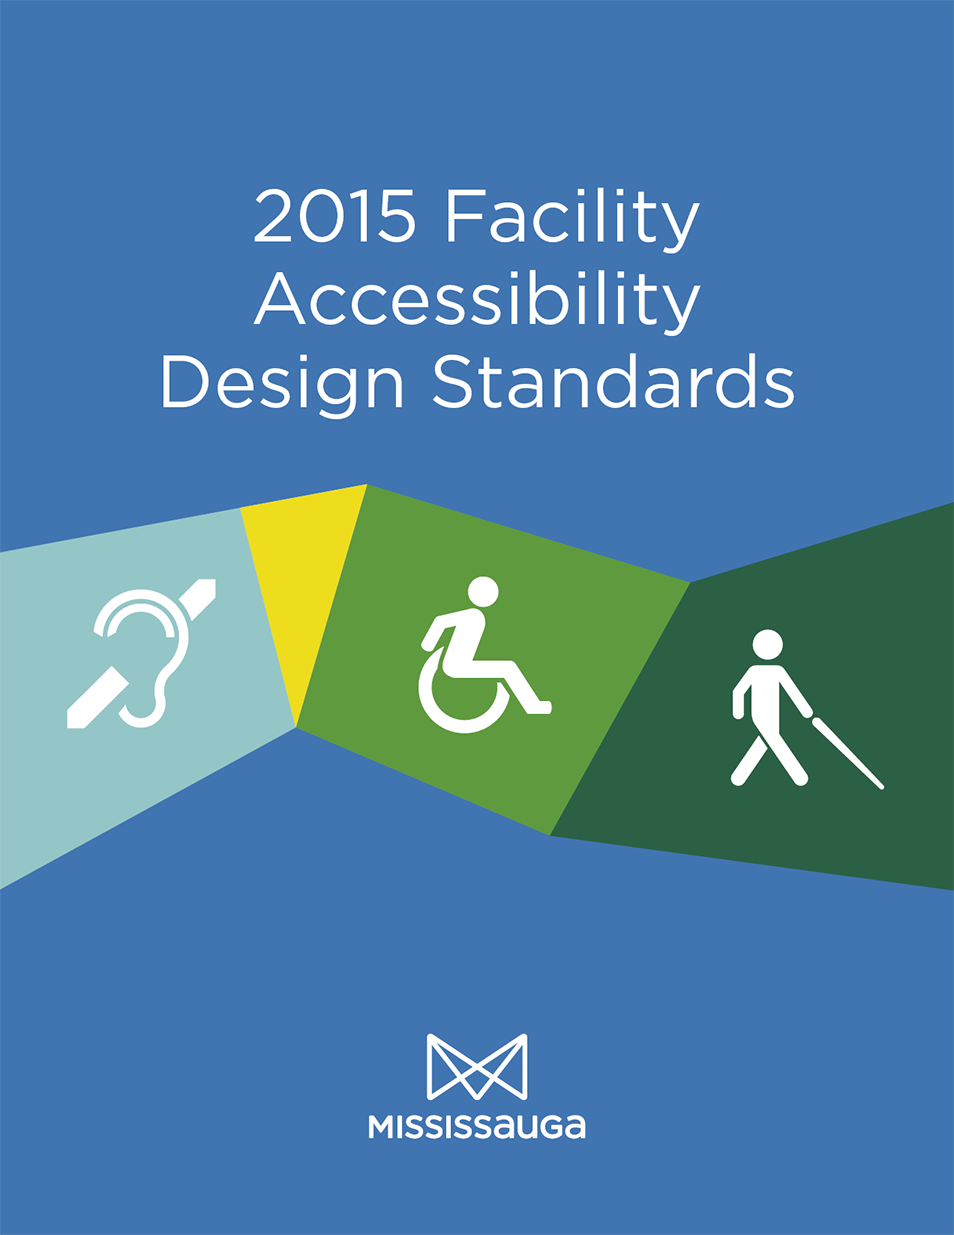 City of Mississauga 2015 Facility Accessibility Design Standards coverpage.